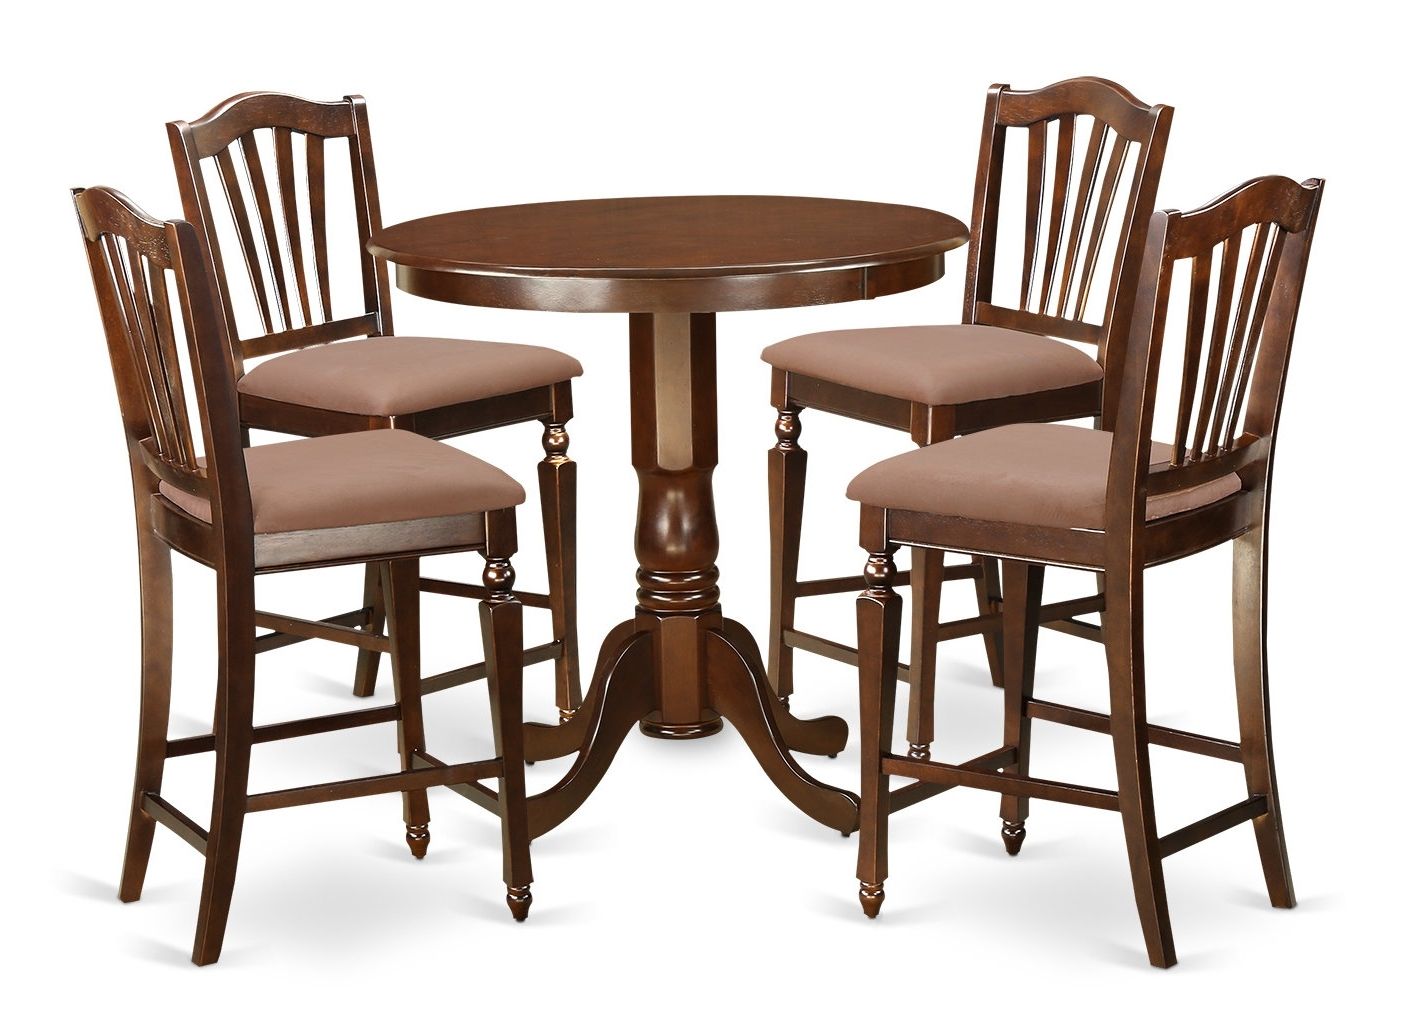 Wayfair In Jaxon Grey 7 Piece Rectangle Extension Dining Sets With Wood Chairs (View 13 of 25)